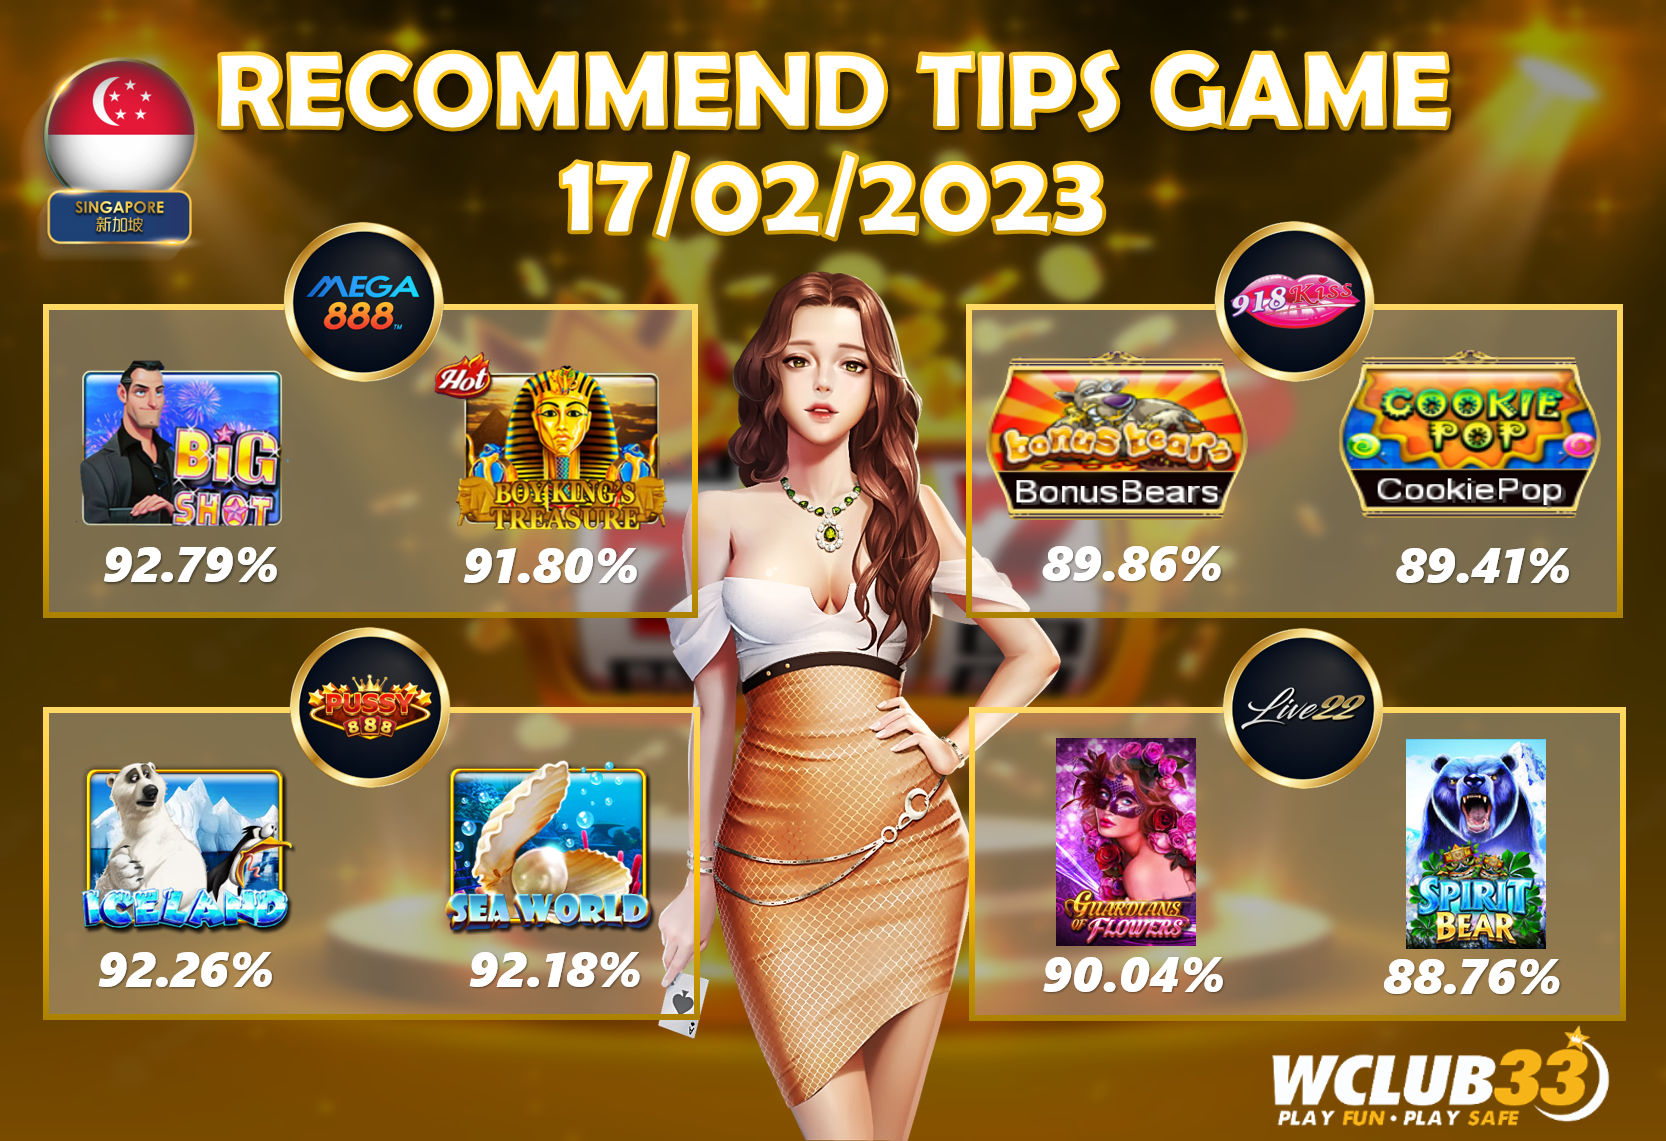 UPDATE TIPS GAME 17/02